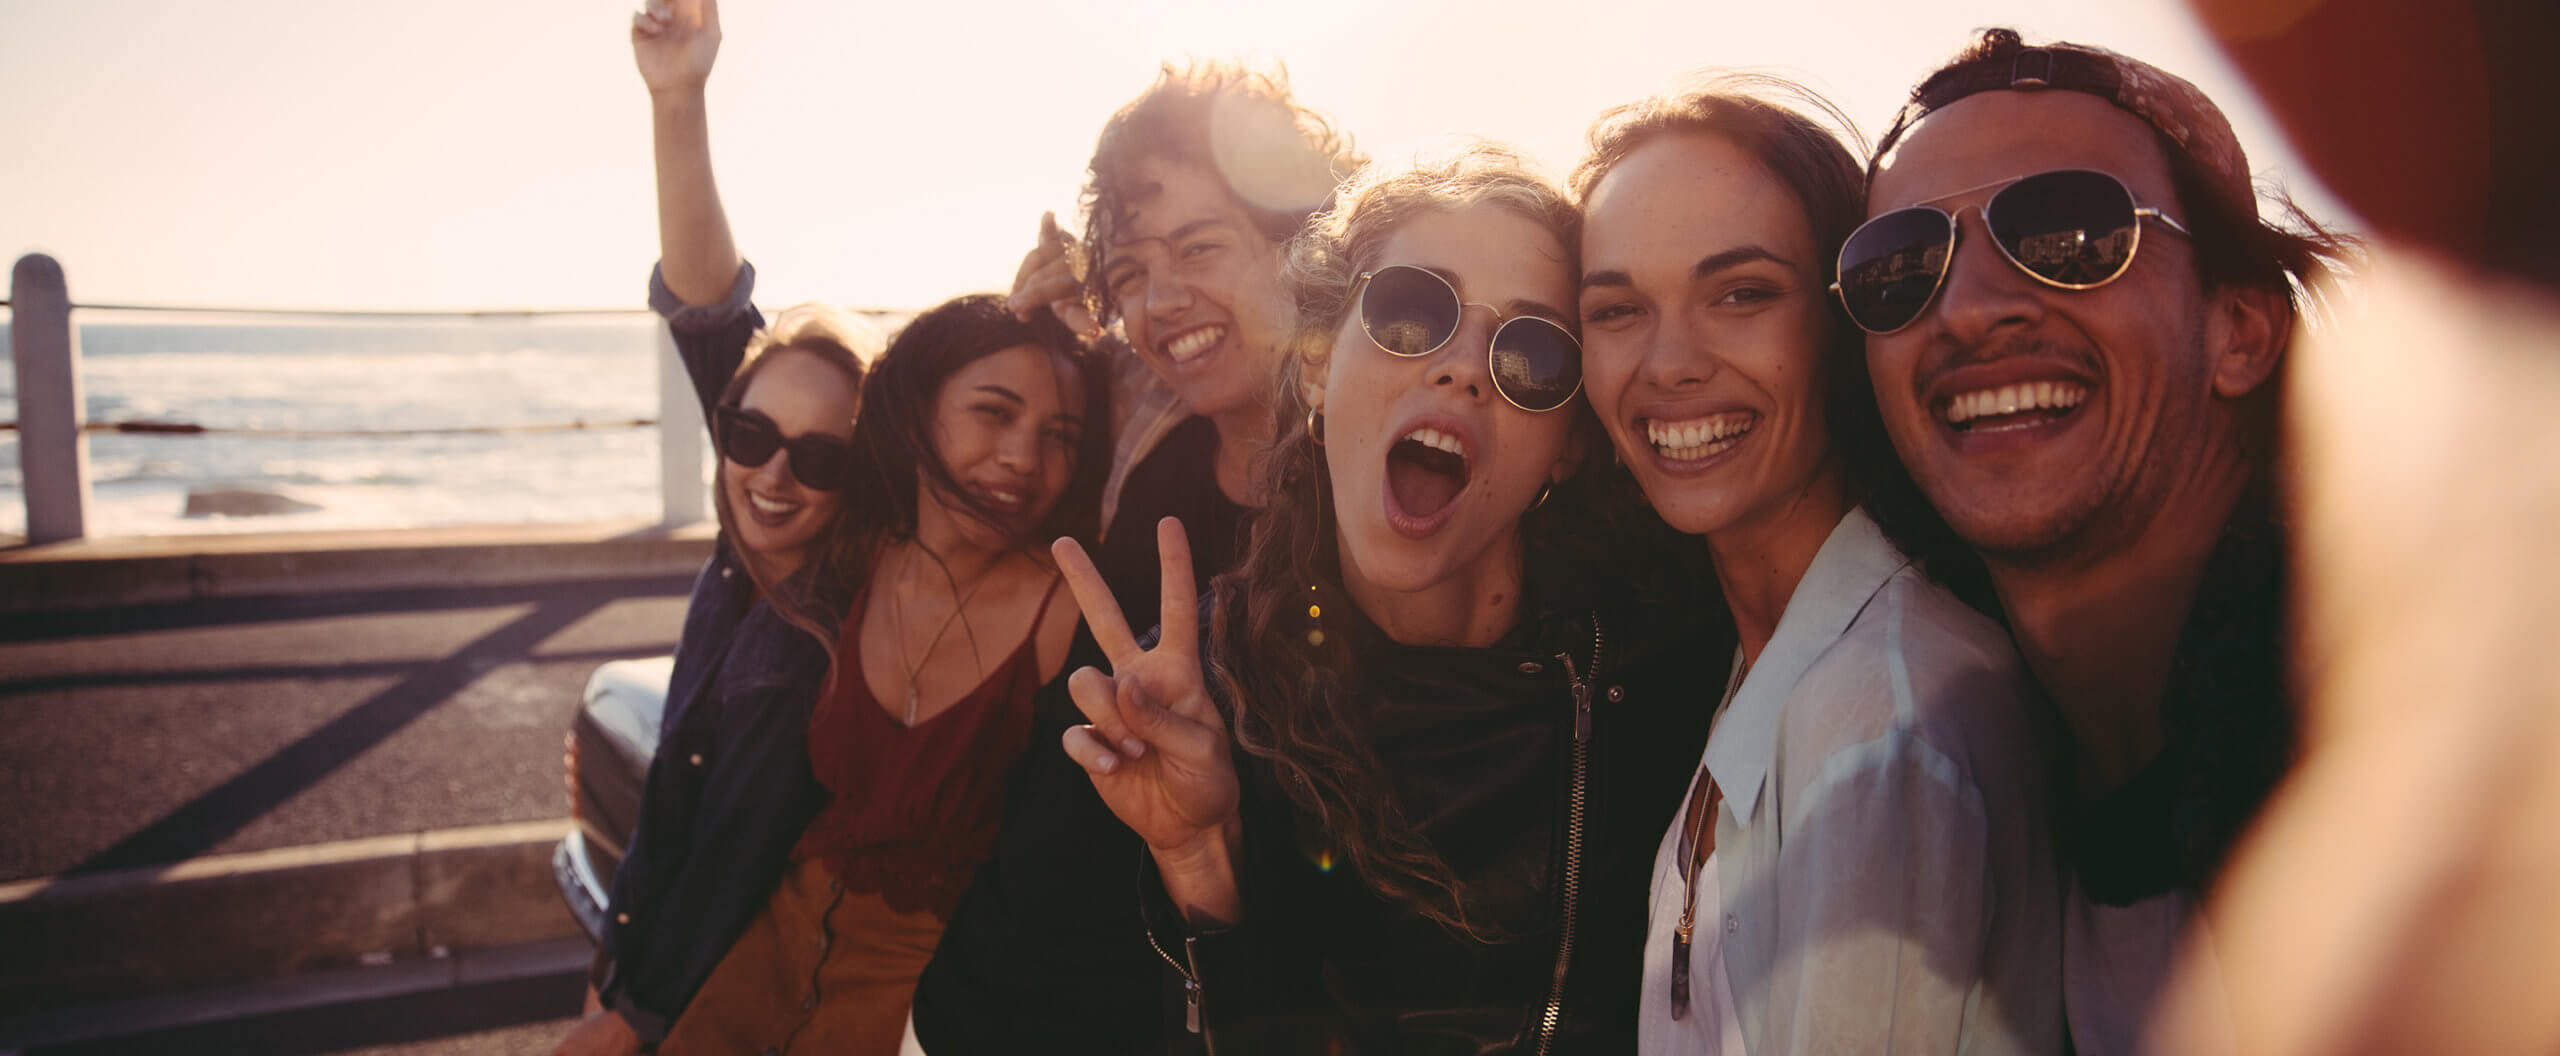 Image of a group of friends smiling together